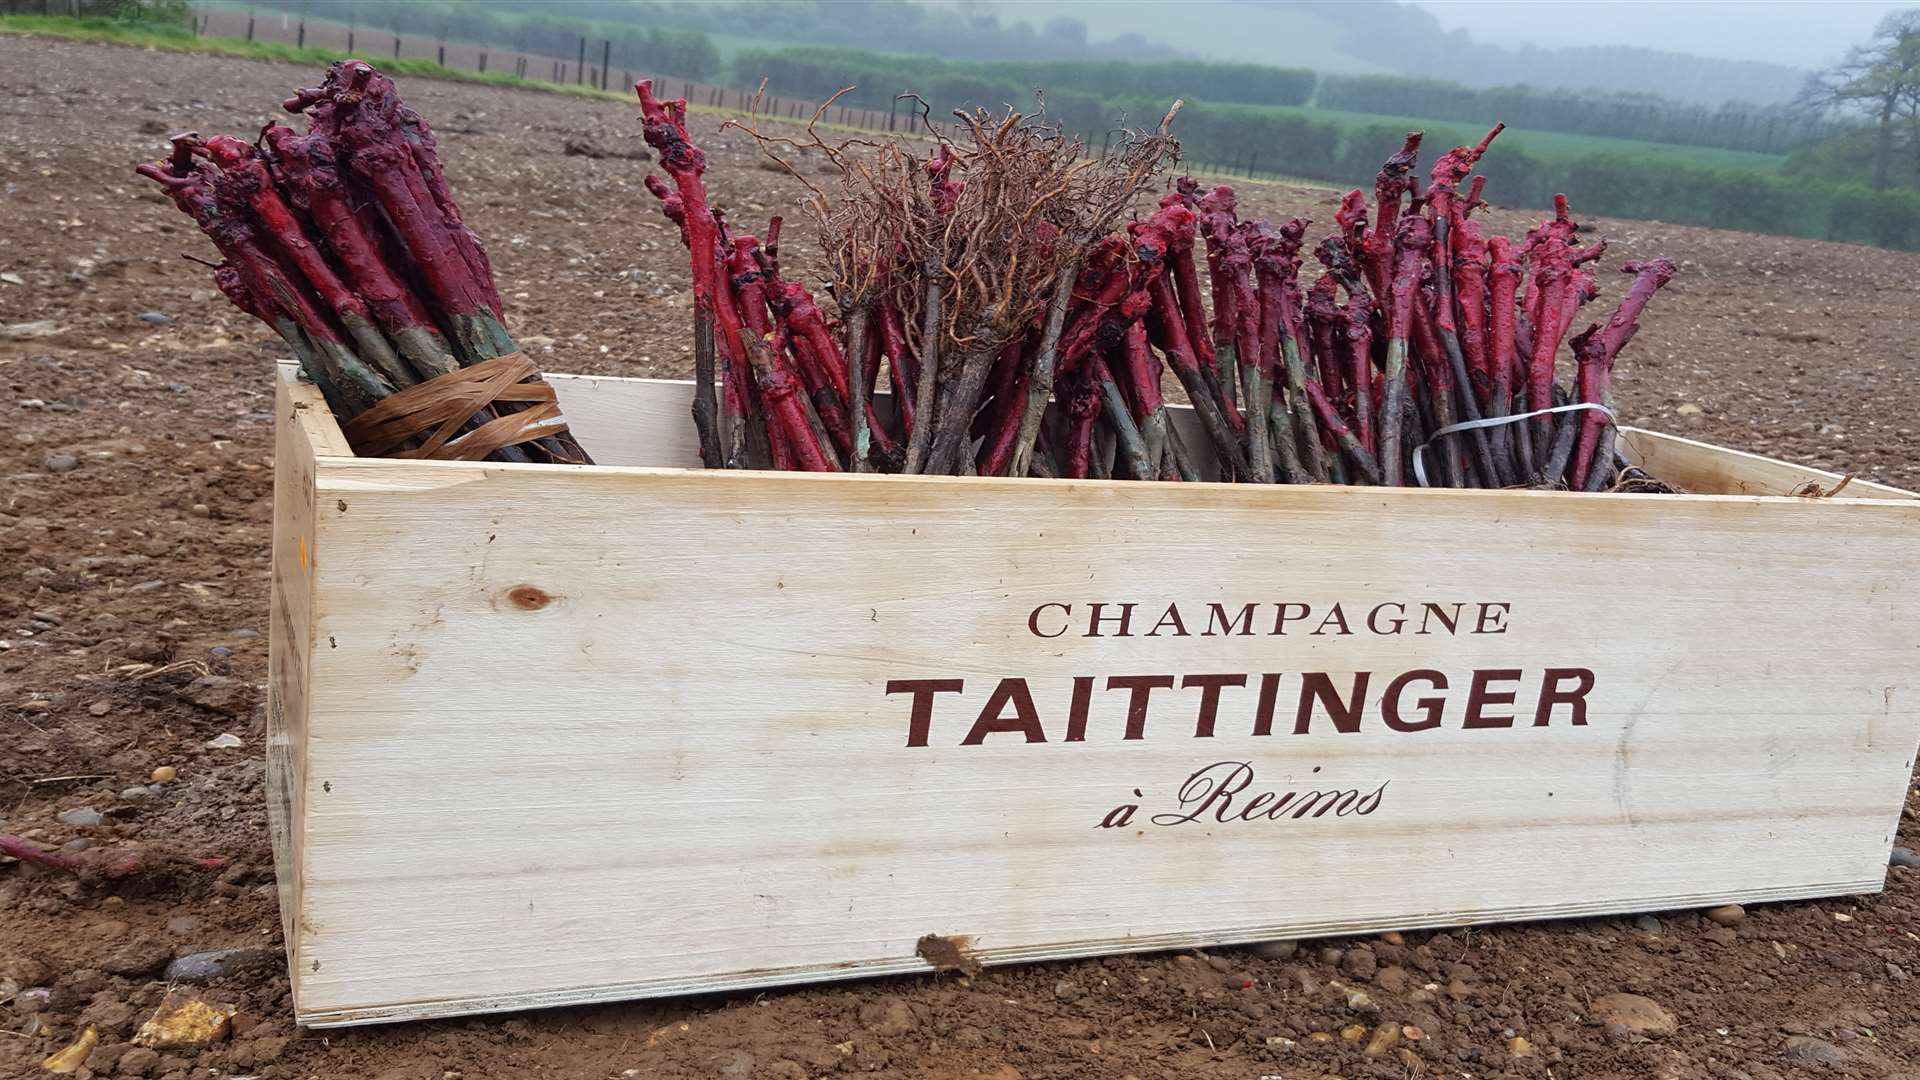 Taittinger has planted its first vines in Kent